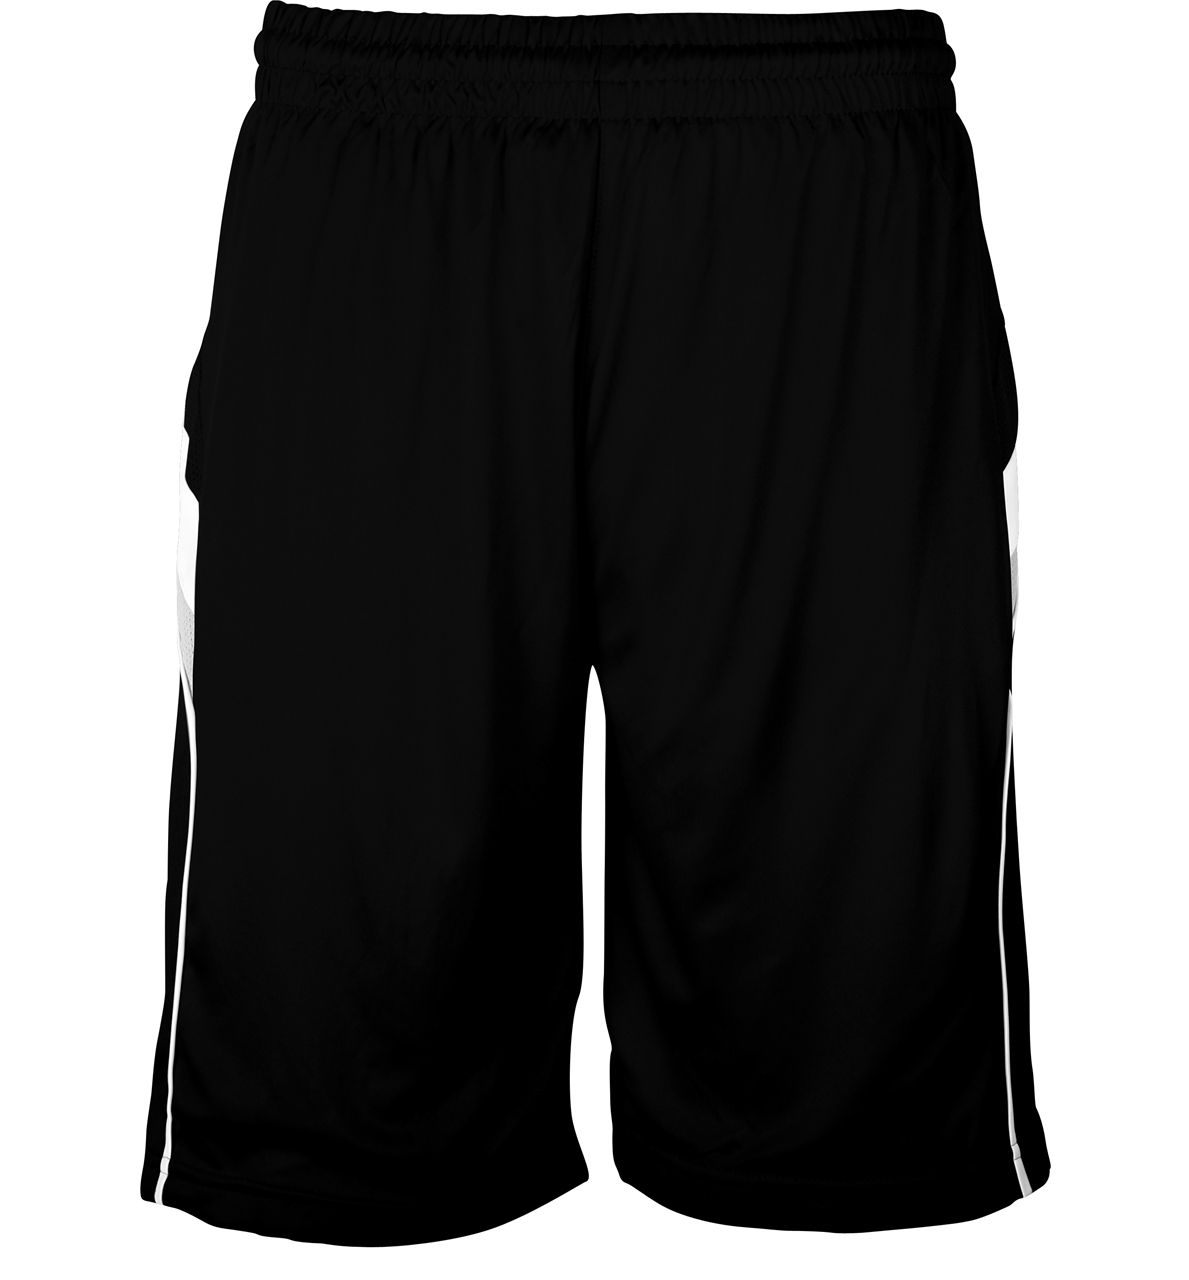 Picture of N3 Sport Dry Fit Youth Basketball Shorts